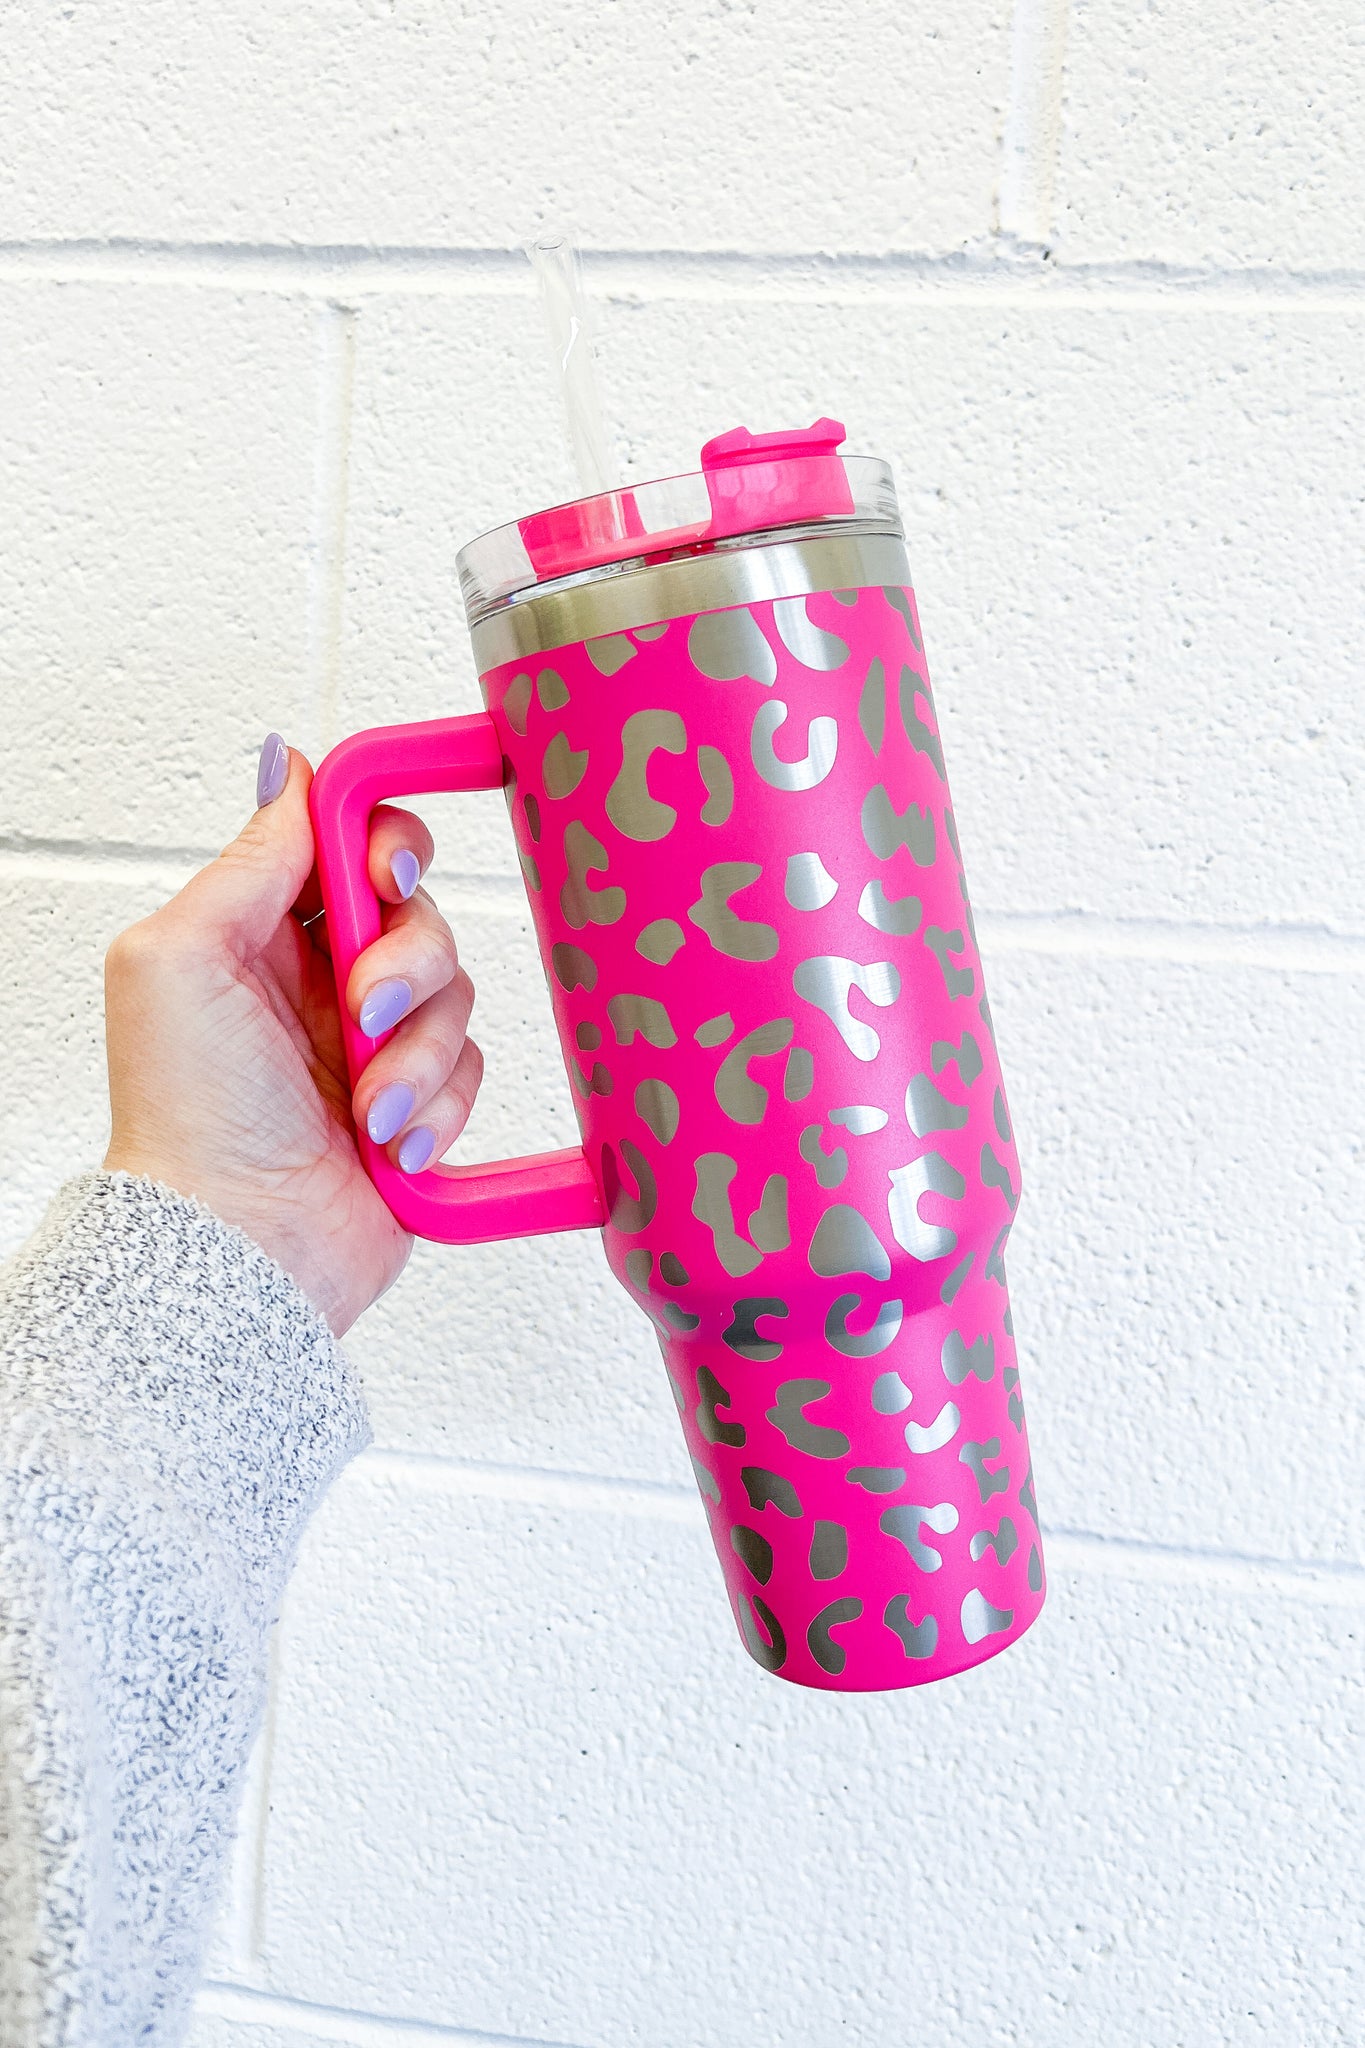 Hot Pink Leopard Tumbler 40 oz – Horse Creek Outfitters